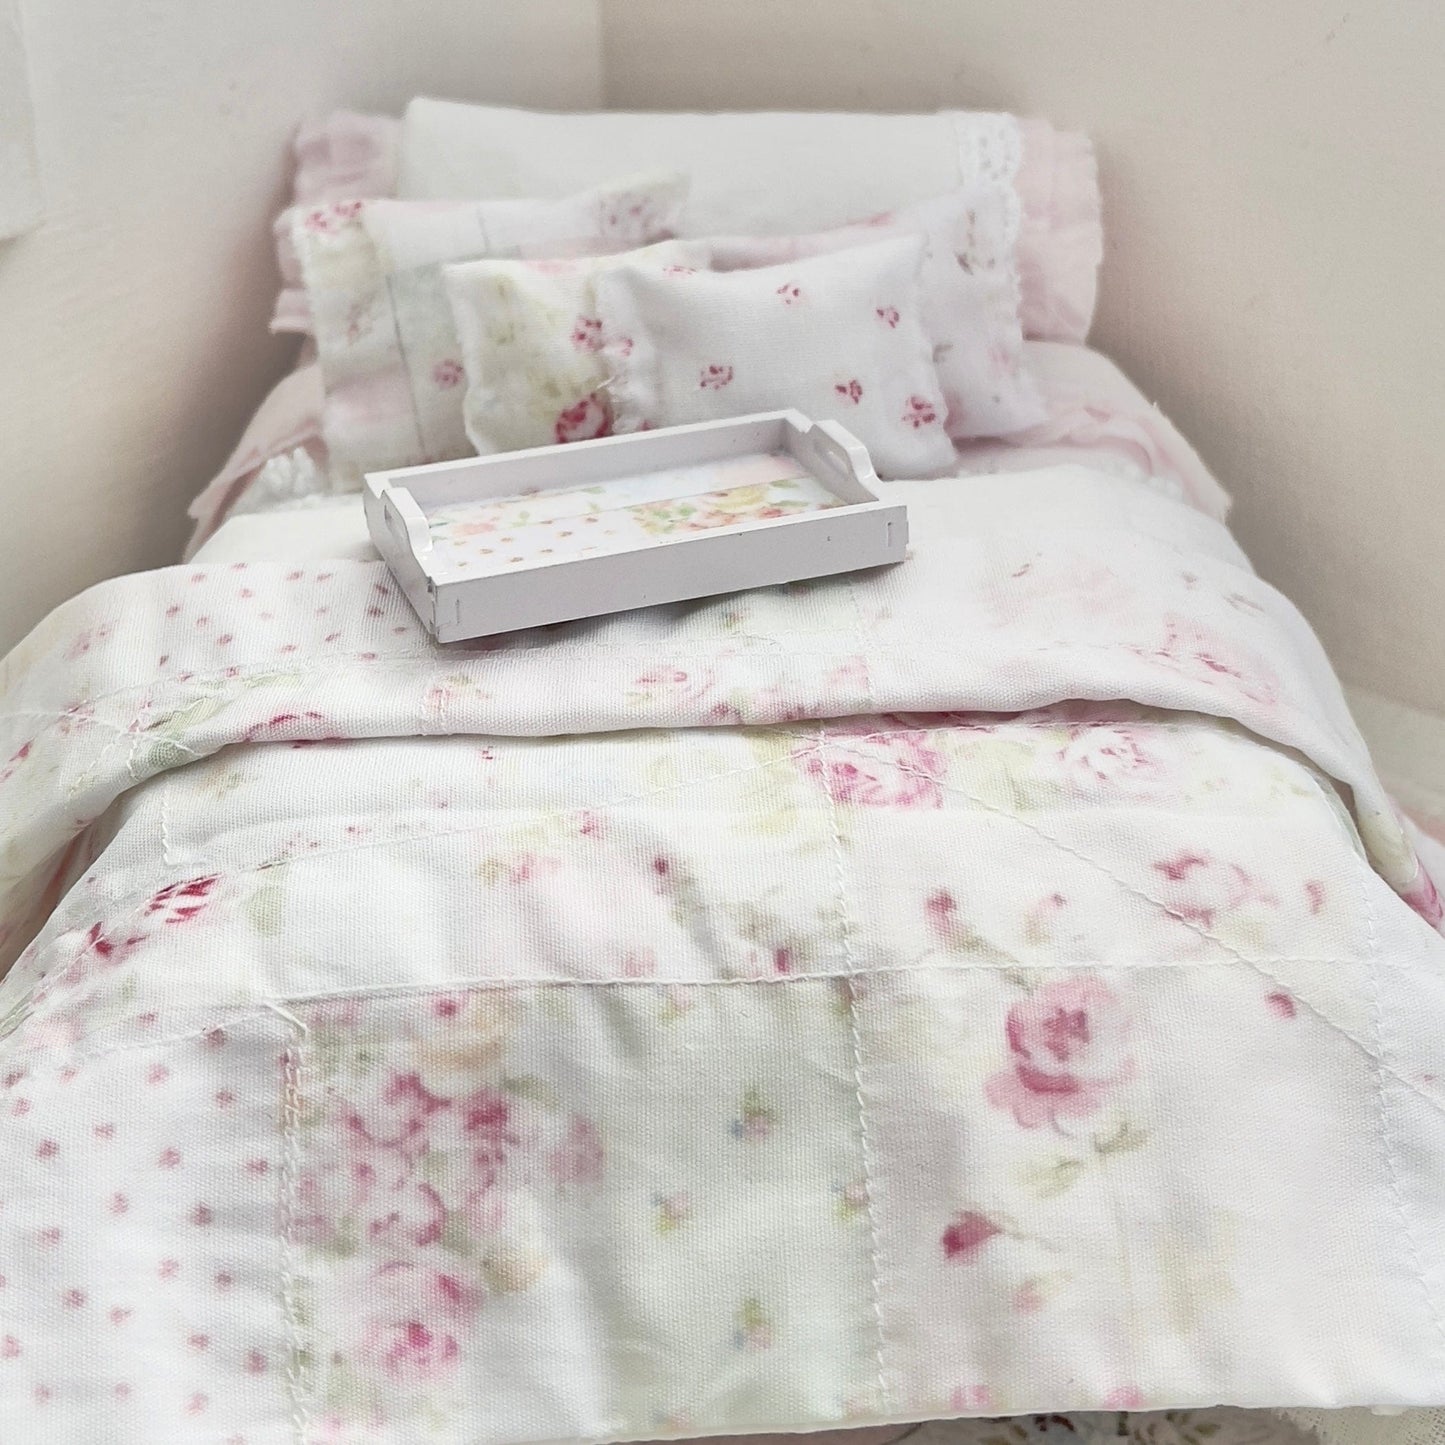 Chantallena Doll House Dressed 1:12 Scale Bed | Pink Wooden Cot with Pink Cotton Bedding Set | June